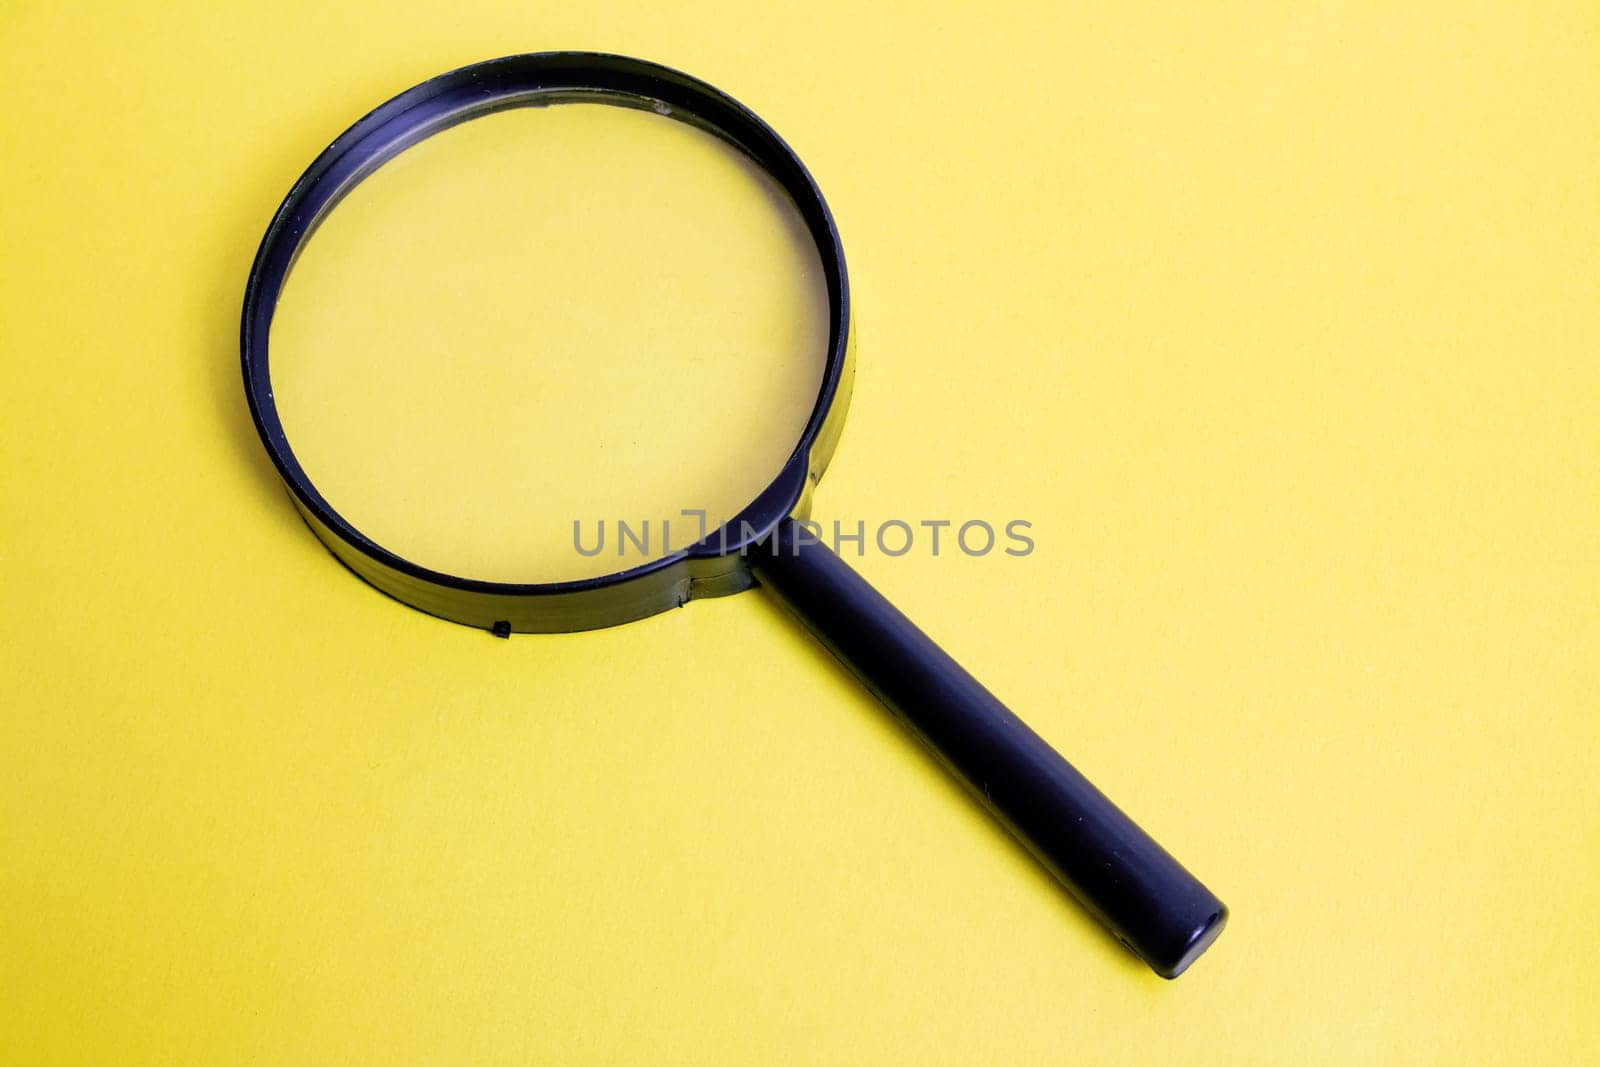 Big magnifier on a yellow background close up